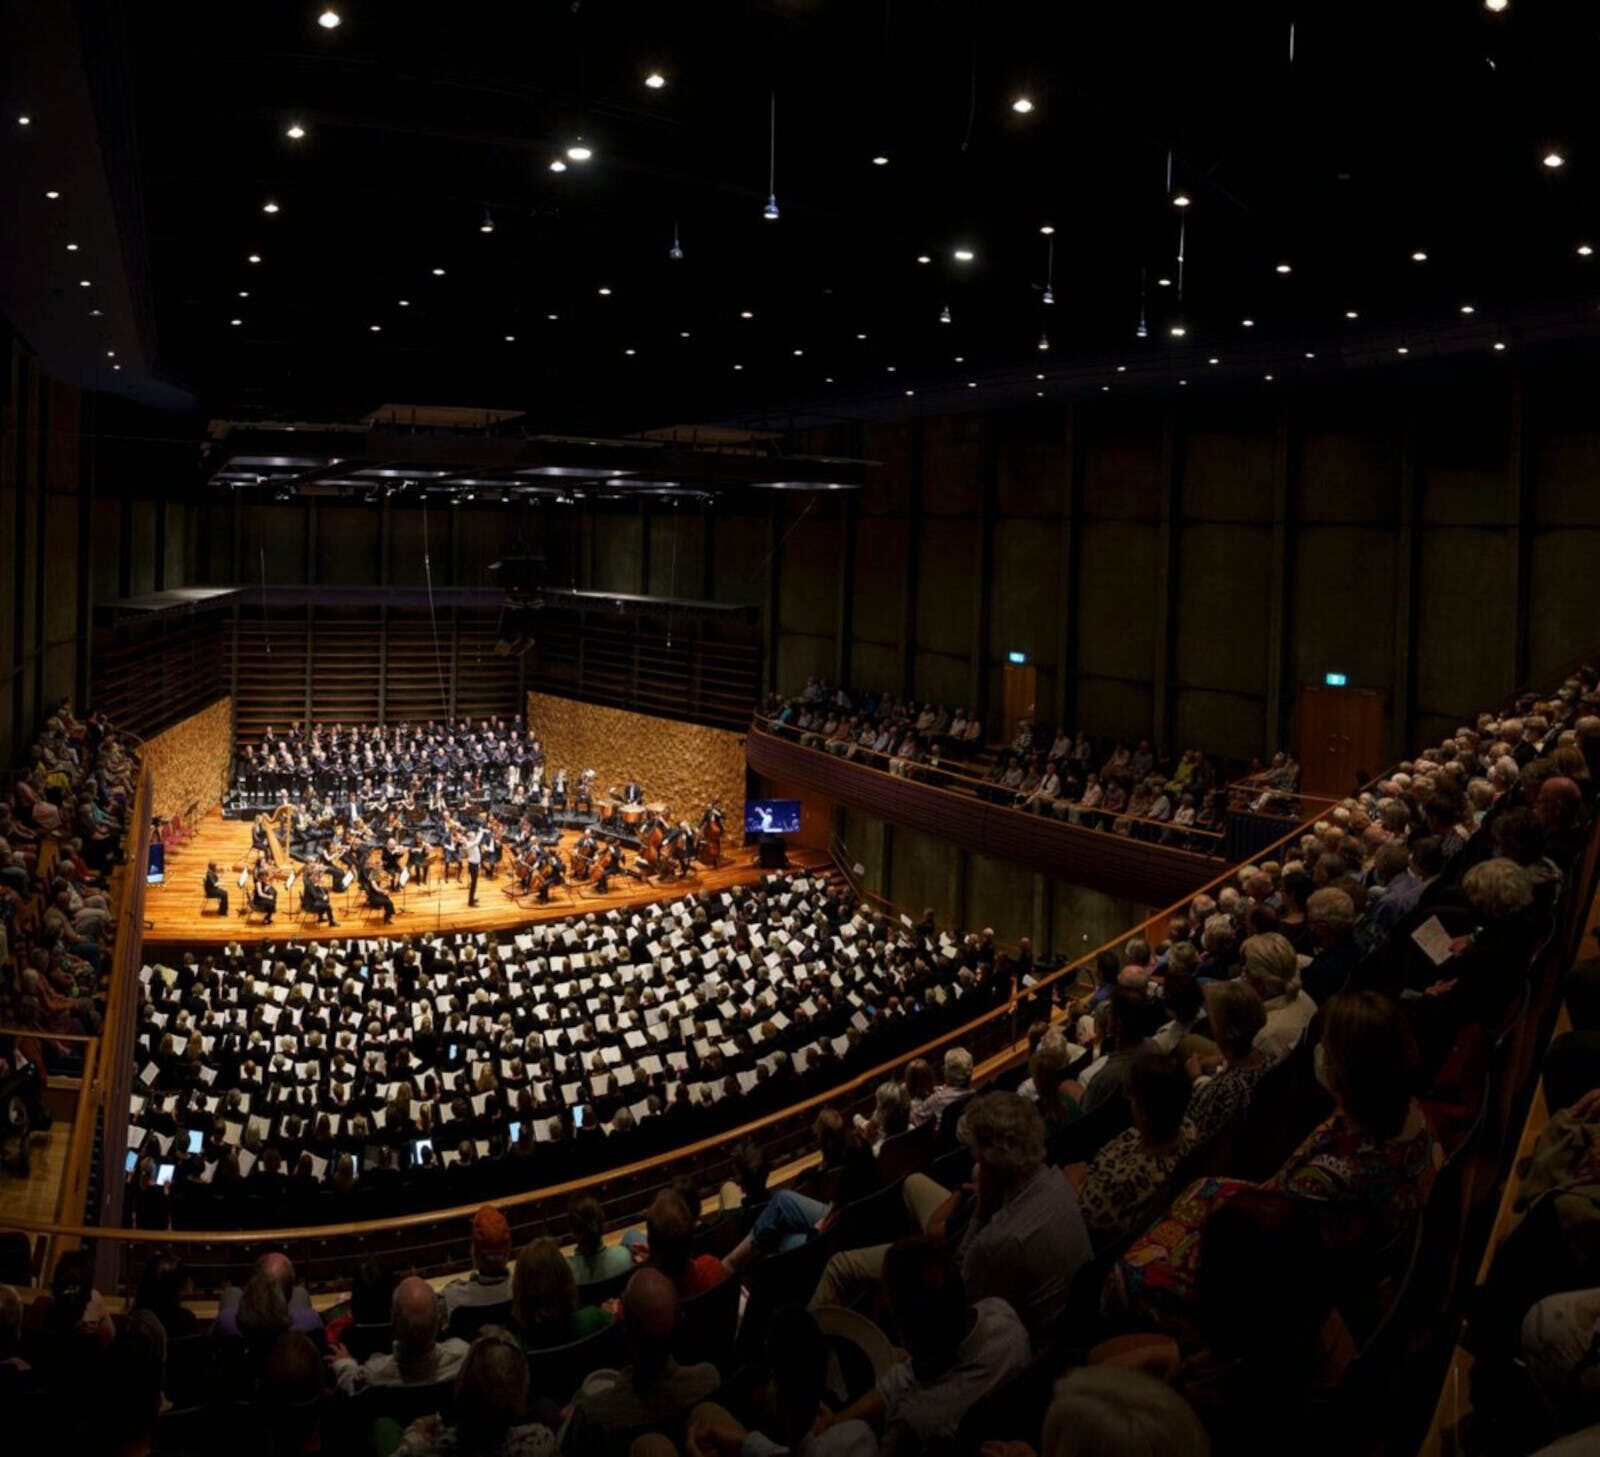 Photo of an orchestra, taken from the balcony of a concert hall.